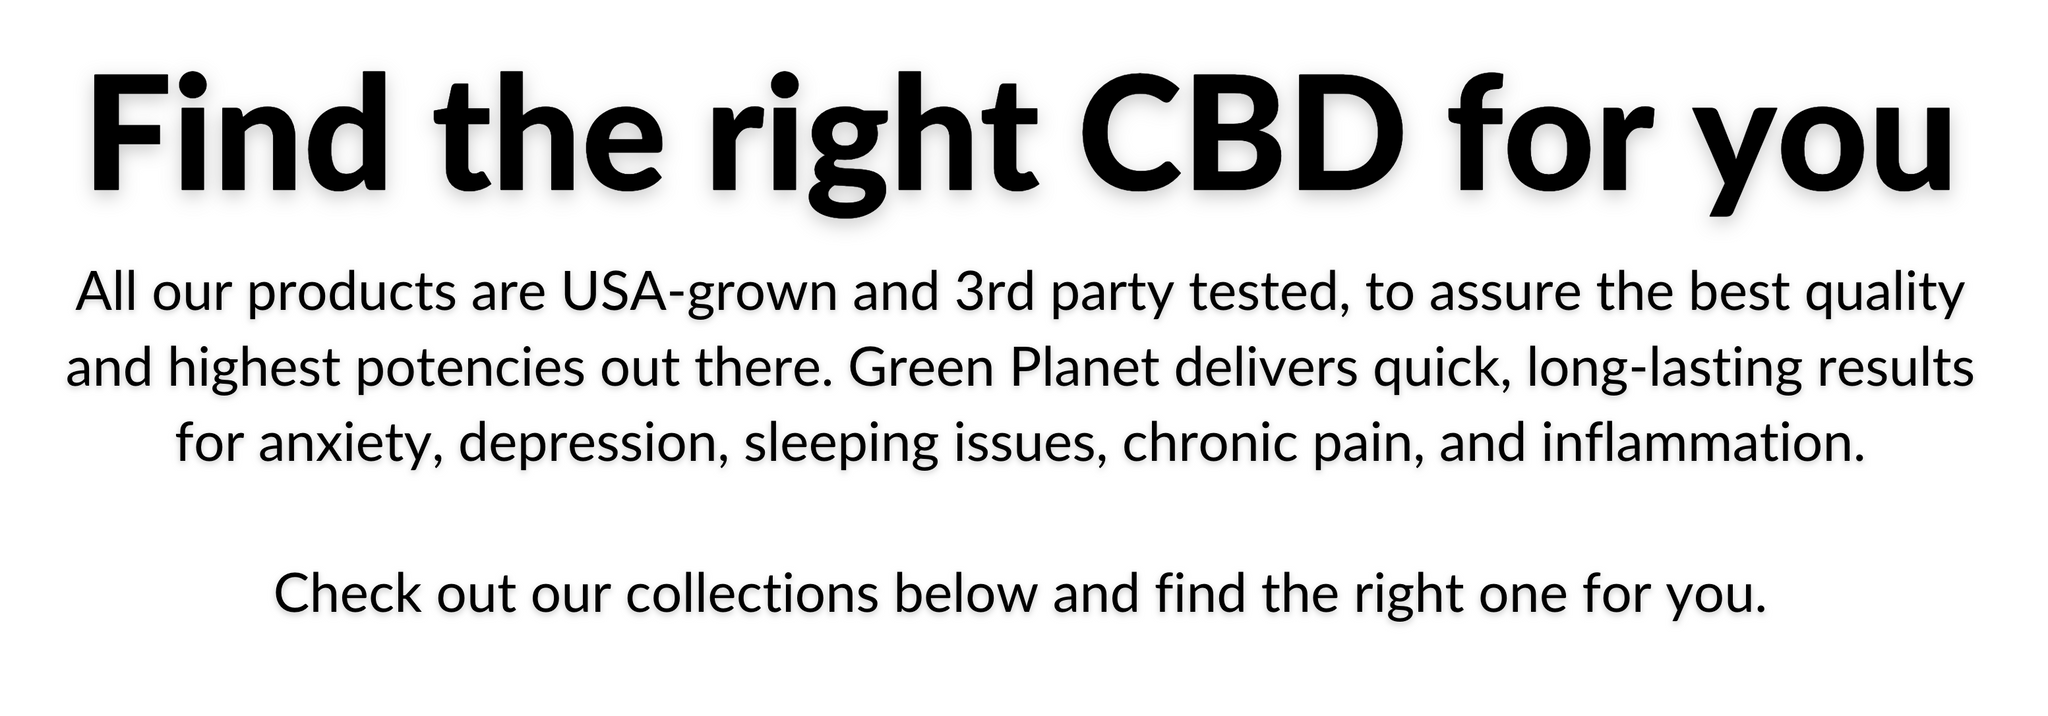 Find the right CBD for you. All our products are USA-grown and 3rd party tested, to assure the best quality and highest potencies out there. Green Planet delivers quick, long-lasting results for anxiety, depression, sleeping issues, chronic pain, and inflammation.  Check out our collections below and find the right one for you.